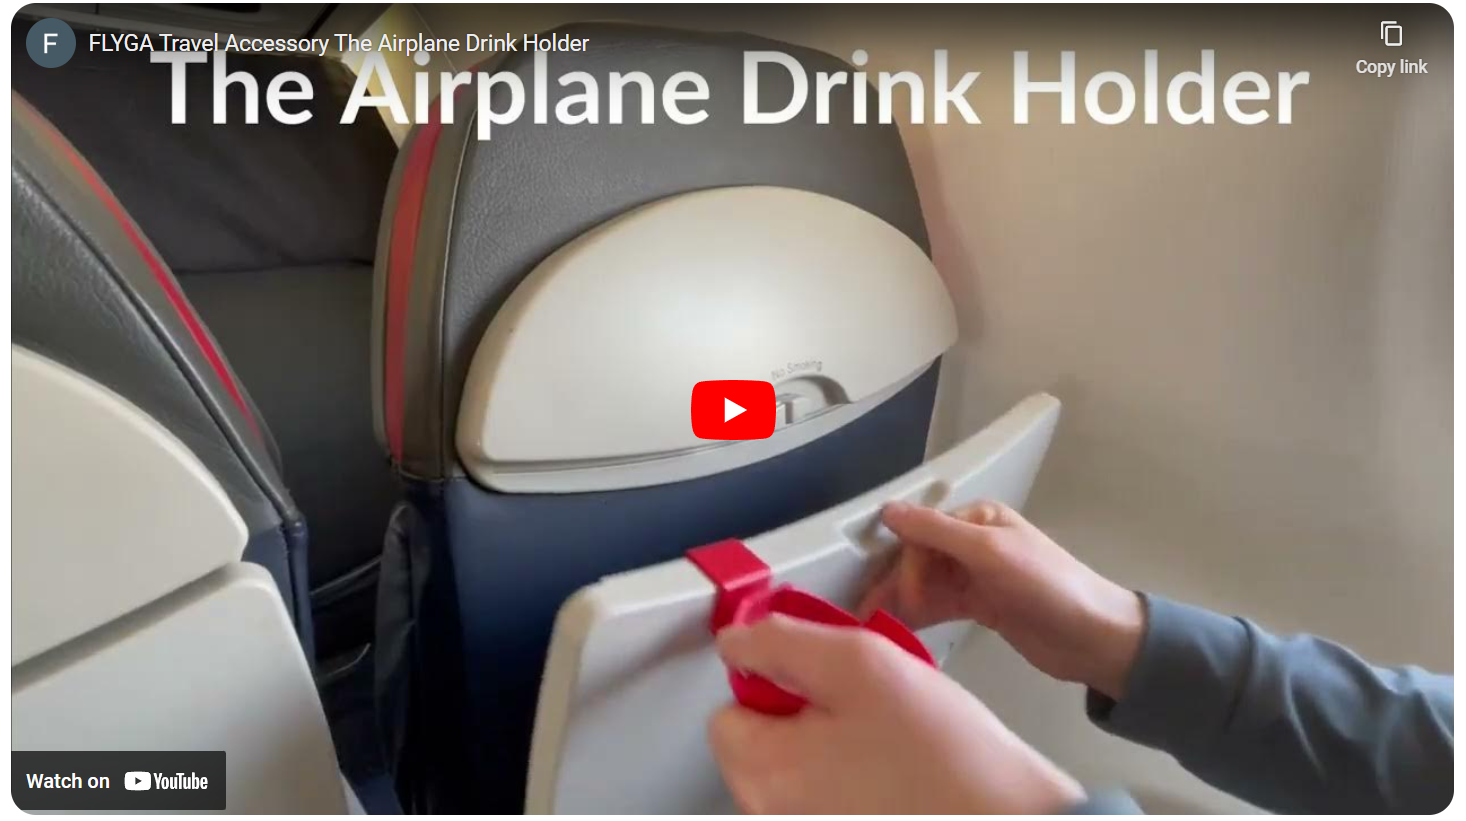 Load video: Airplane travel accessory cool travel gadget